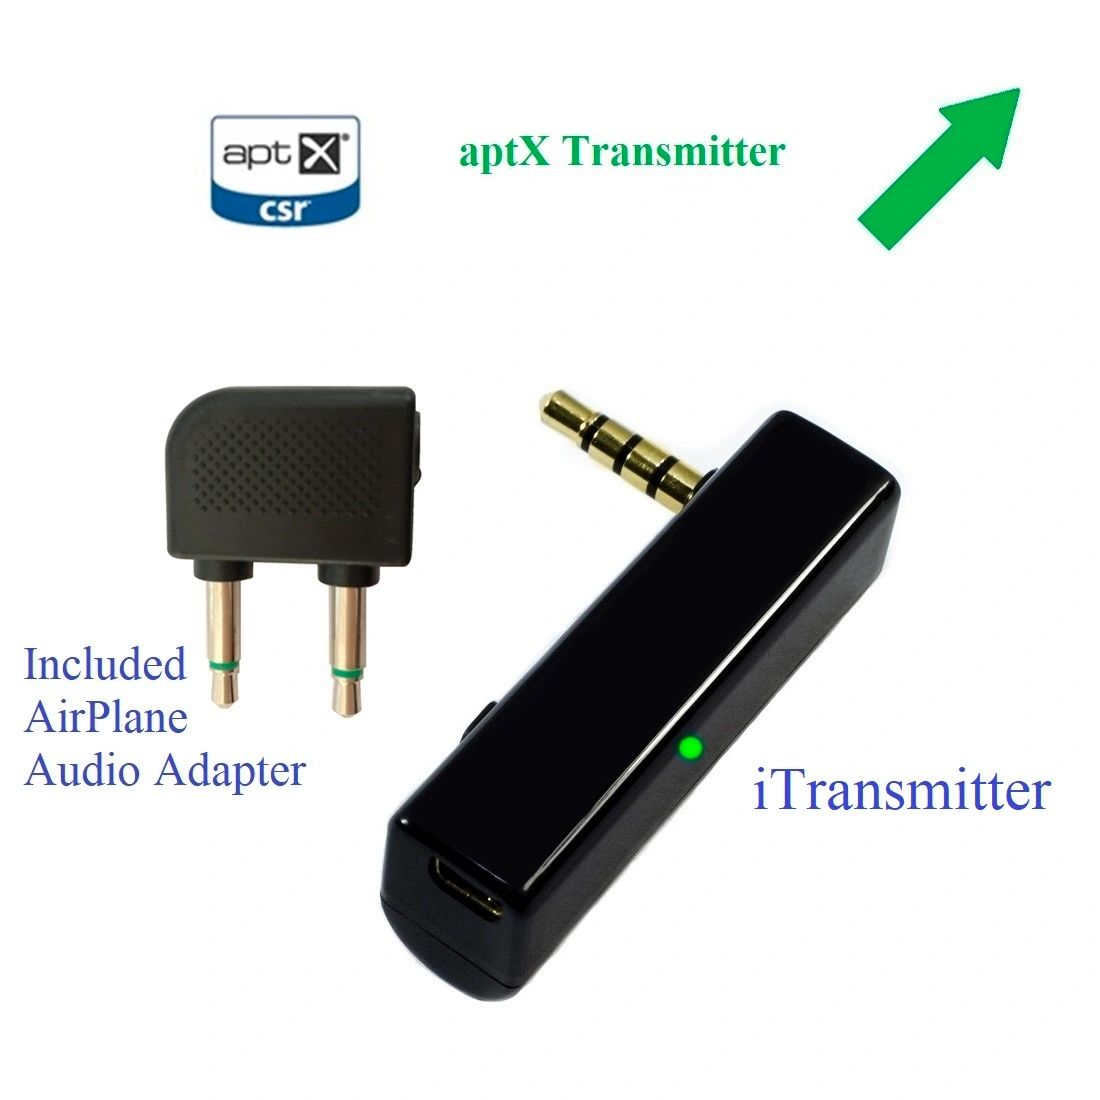 KOKKIA AirConnect_aptX : Airplane in-Flight Bluetooth Transmitter with aptX,  Lets You untether from Seats,Freely Enjoy